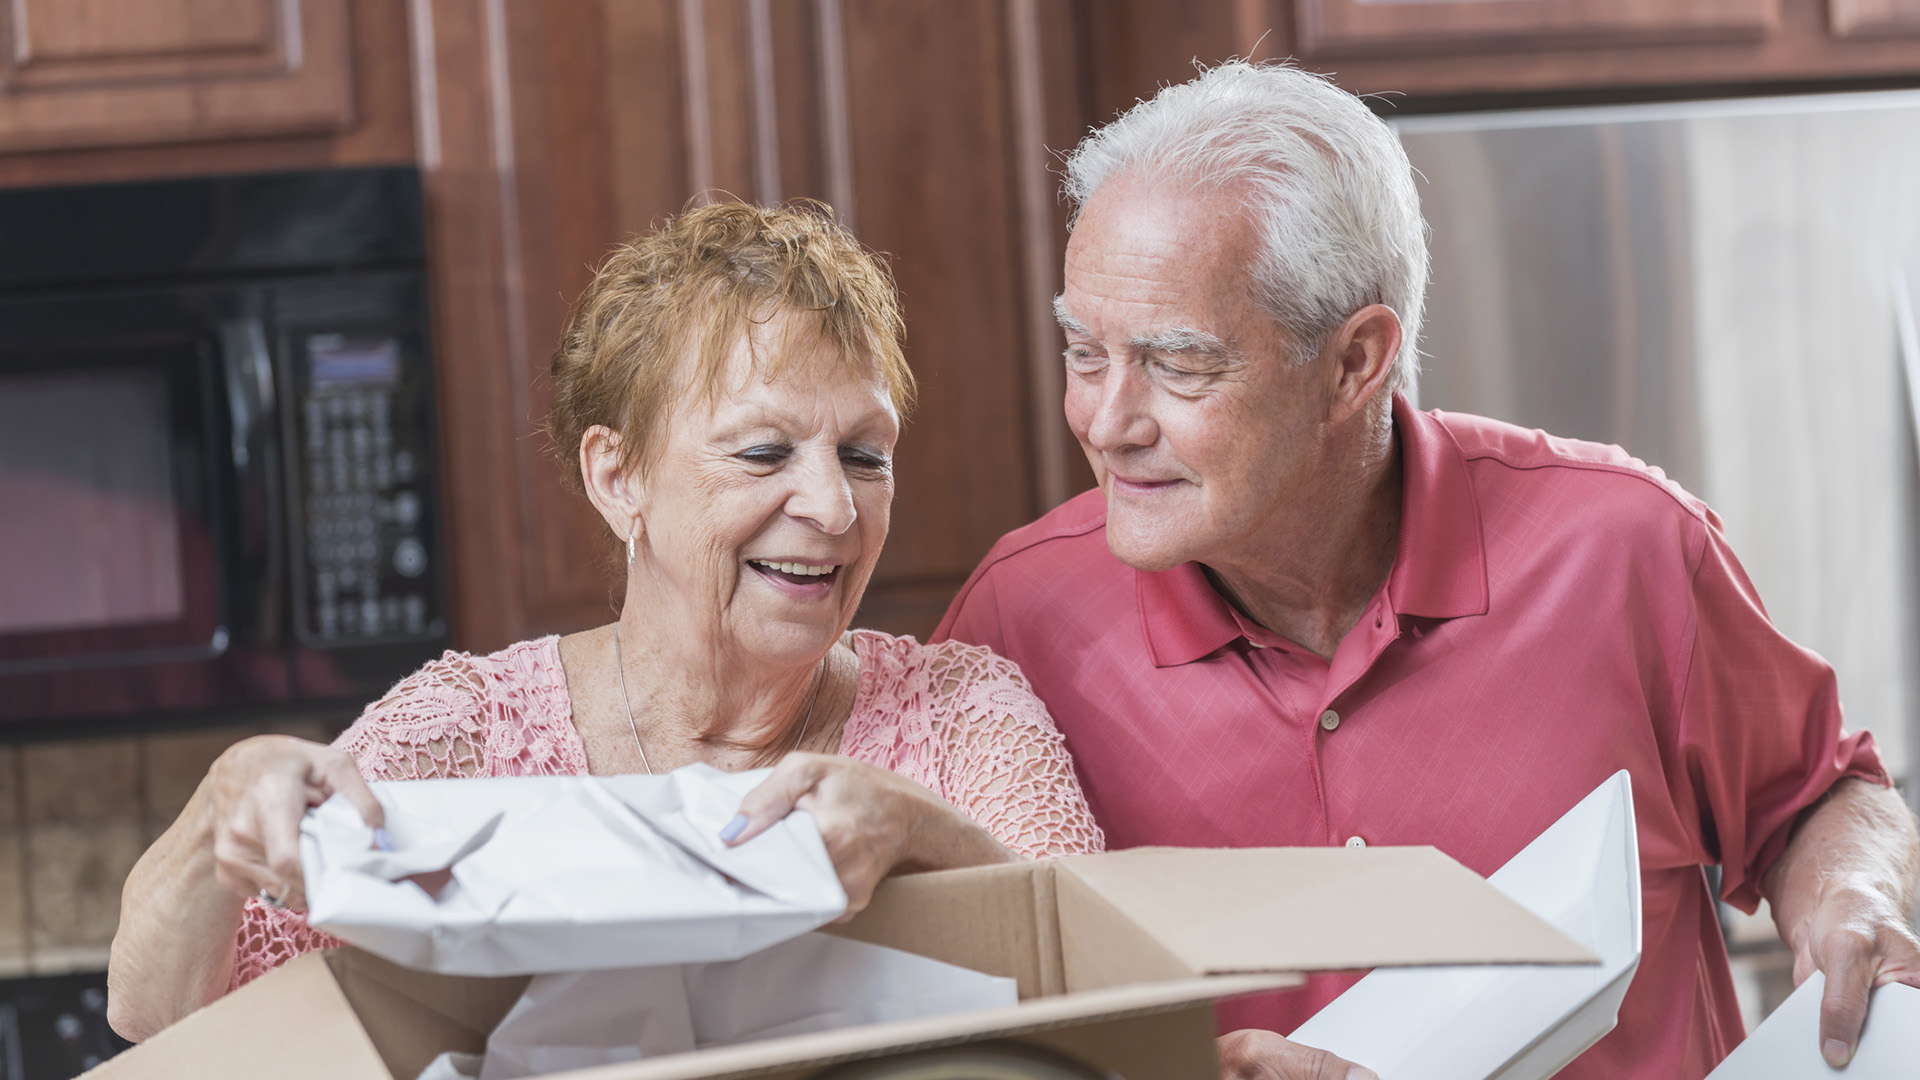 A senior couple moving house. They are packing or unpacking a cardboard box with dishes in the kitchen. They are smiling and talking as they lift the plates.